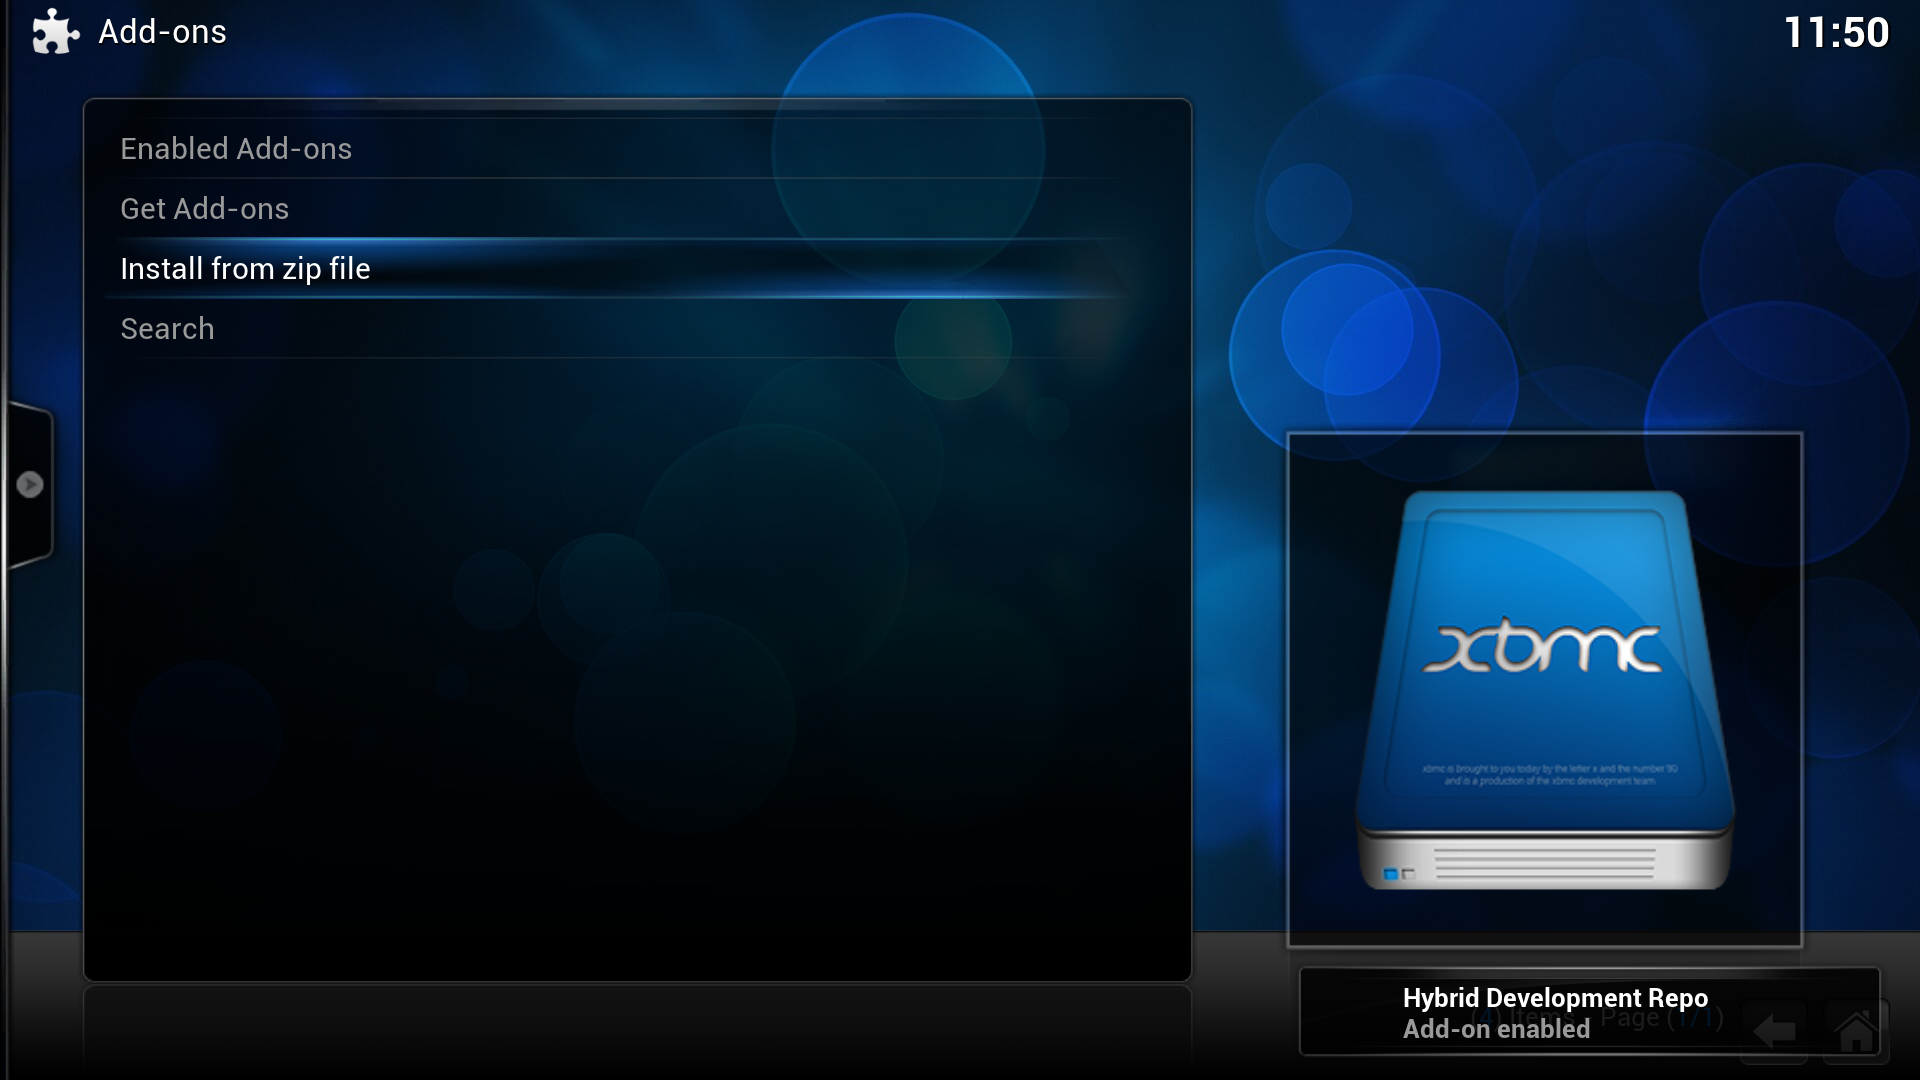 Step 3: In the bottom right, Kodi notifies when the add-on is installed and enabled.